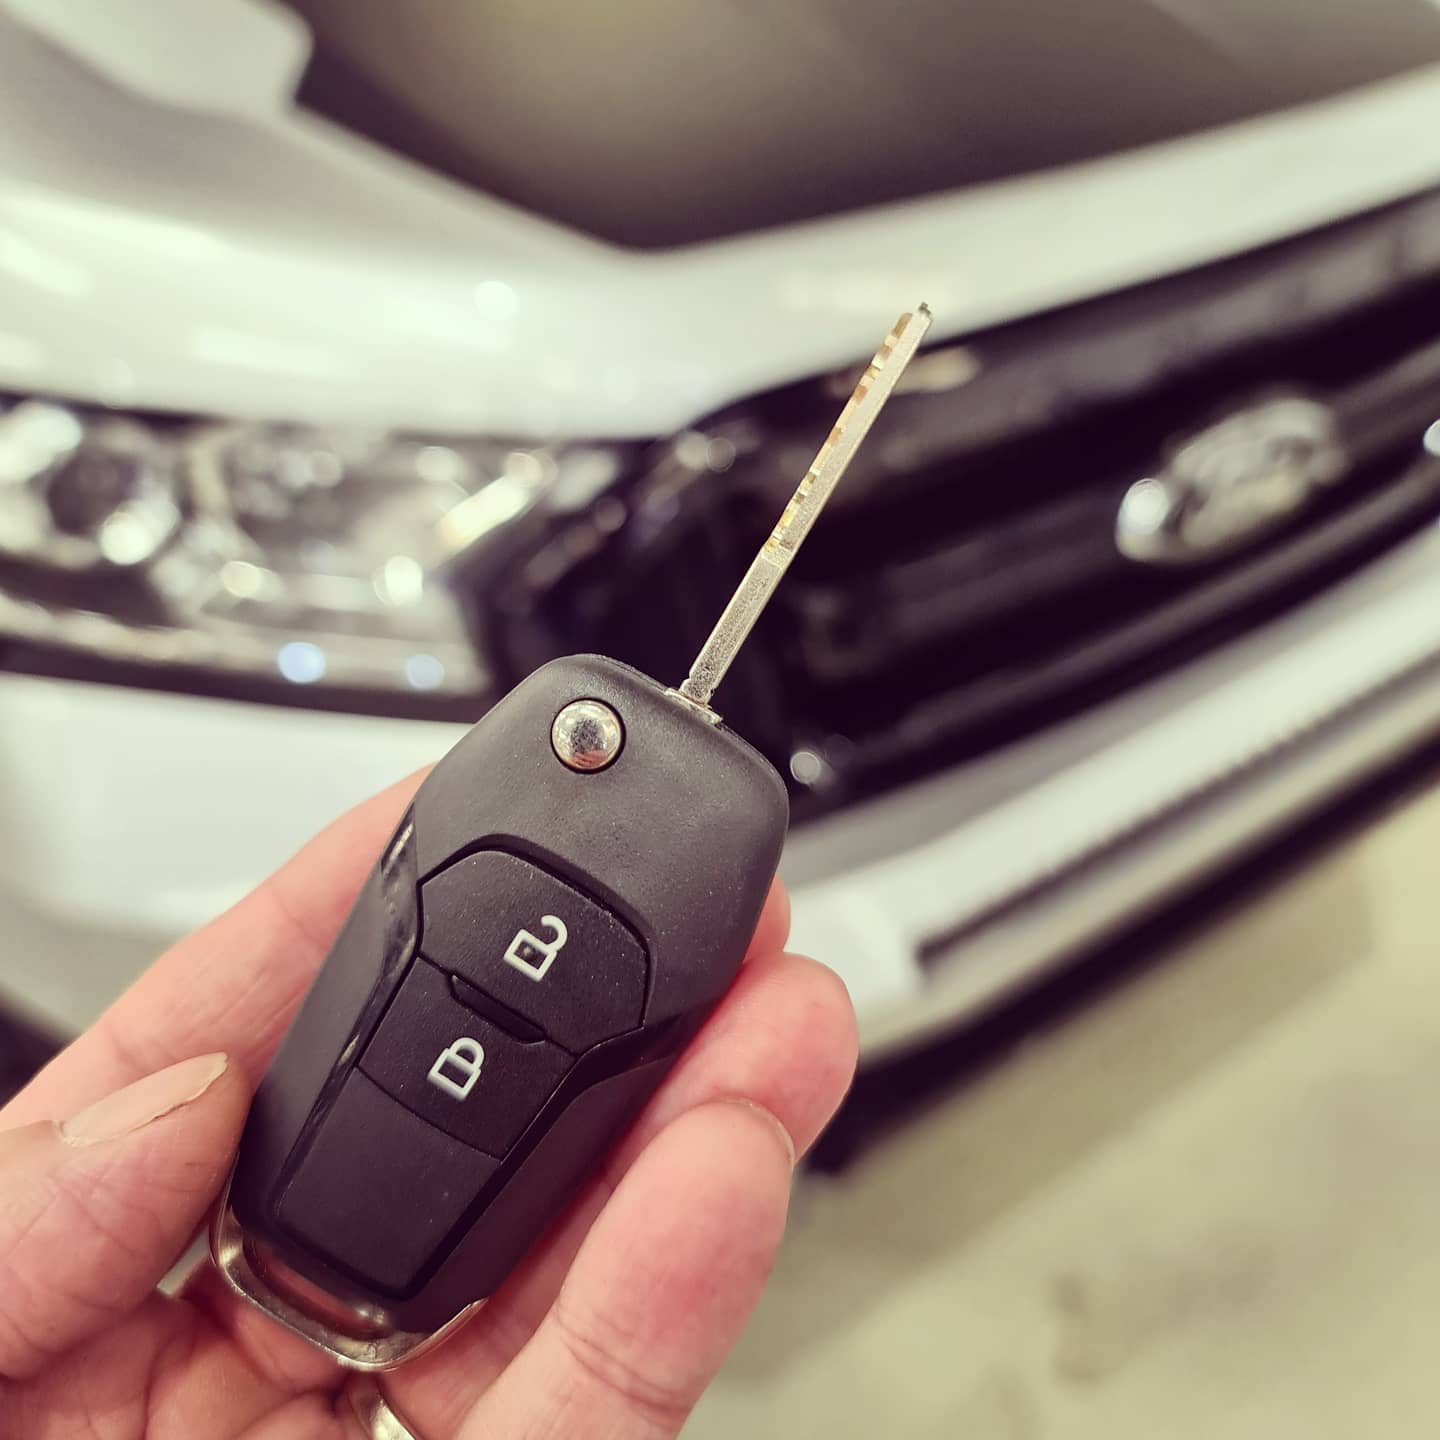 Why Choose Car Key Rescue For Ford Key Replacements in Perth